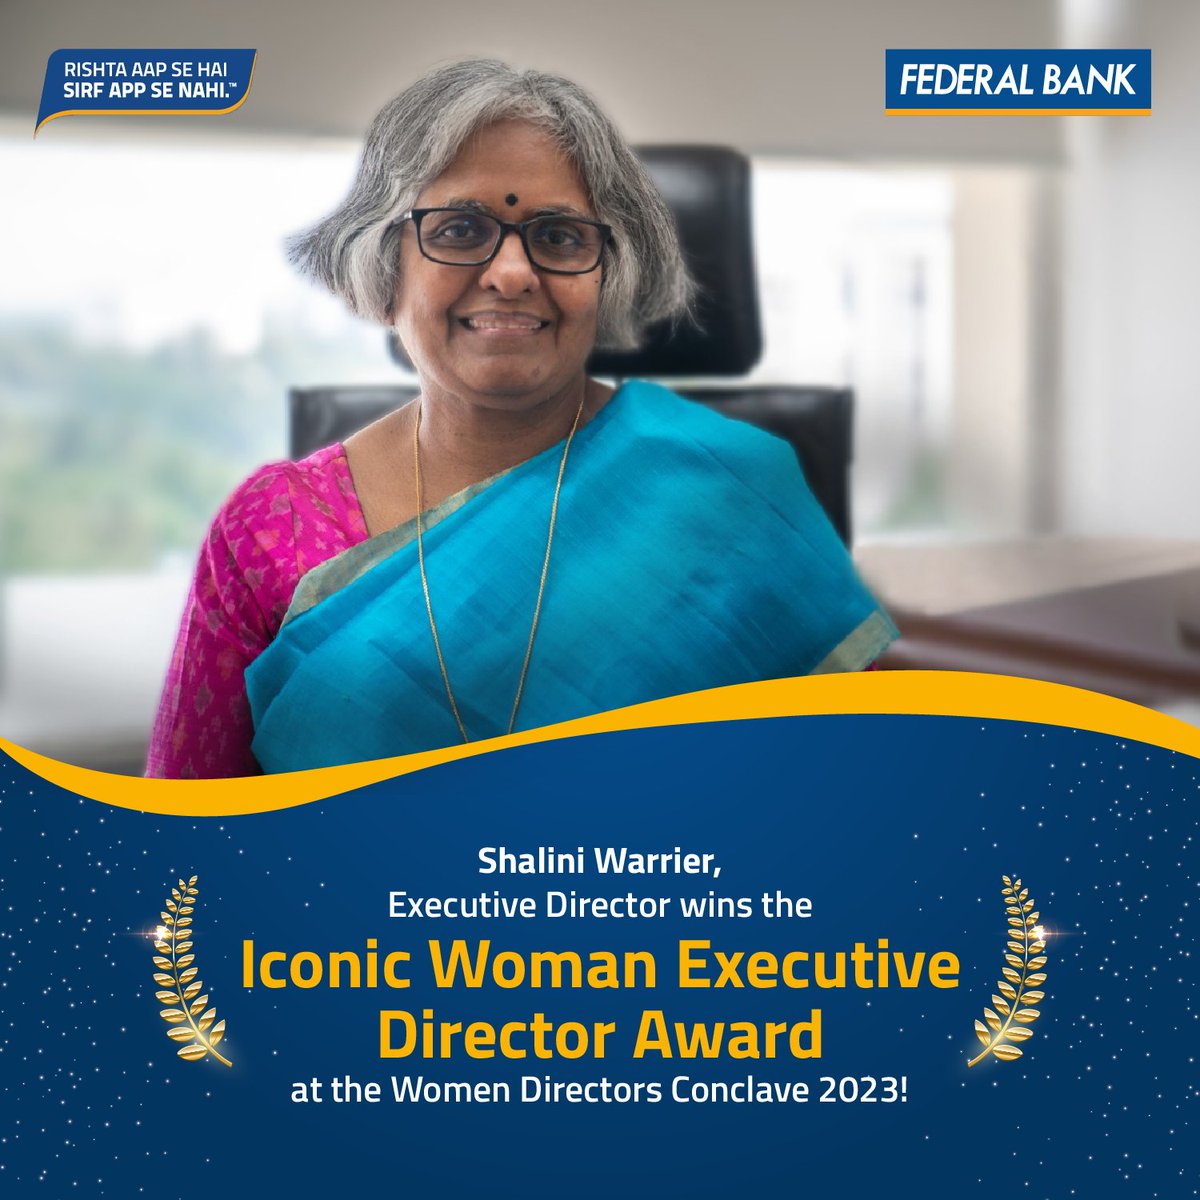 Ms. Shalini Warrier, Executive Director, Federal Bank was conferred the Iconic Woman Executive Director Award 2023 at the Women Directors Conclave by ‘Mentor My Board’.

#FederalBank #WomenLeaders #MentorByBoard #WomenDirector